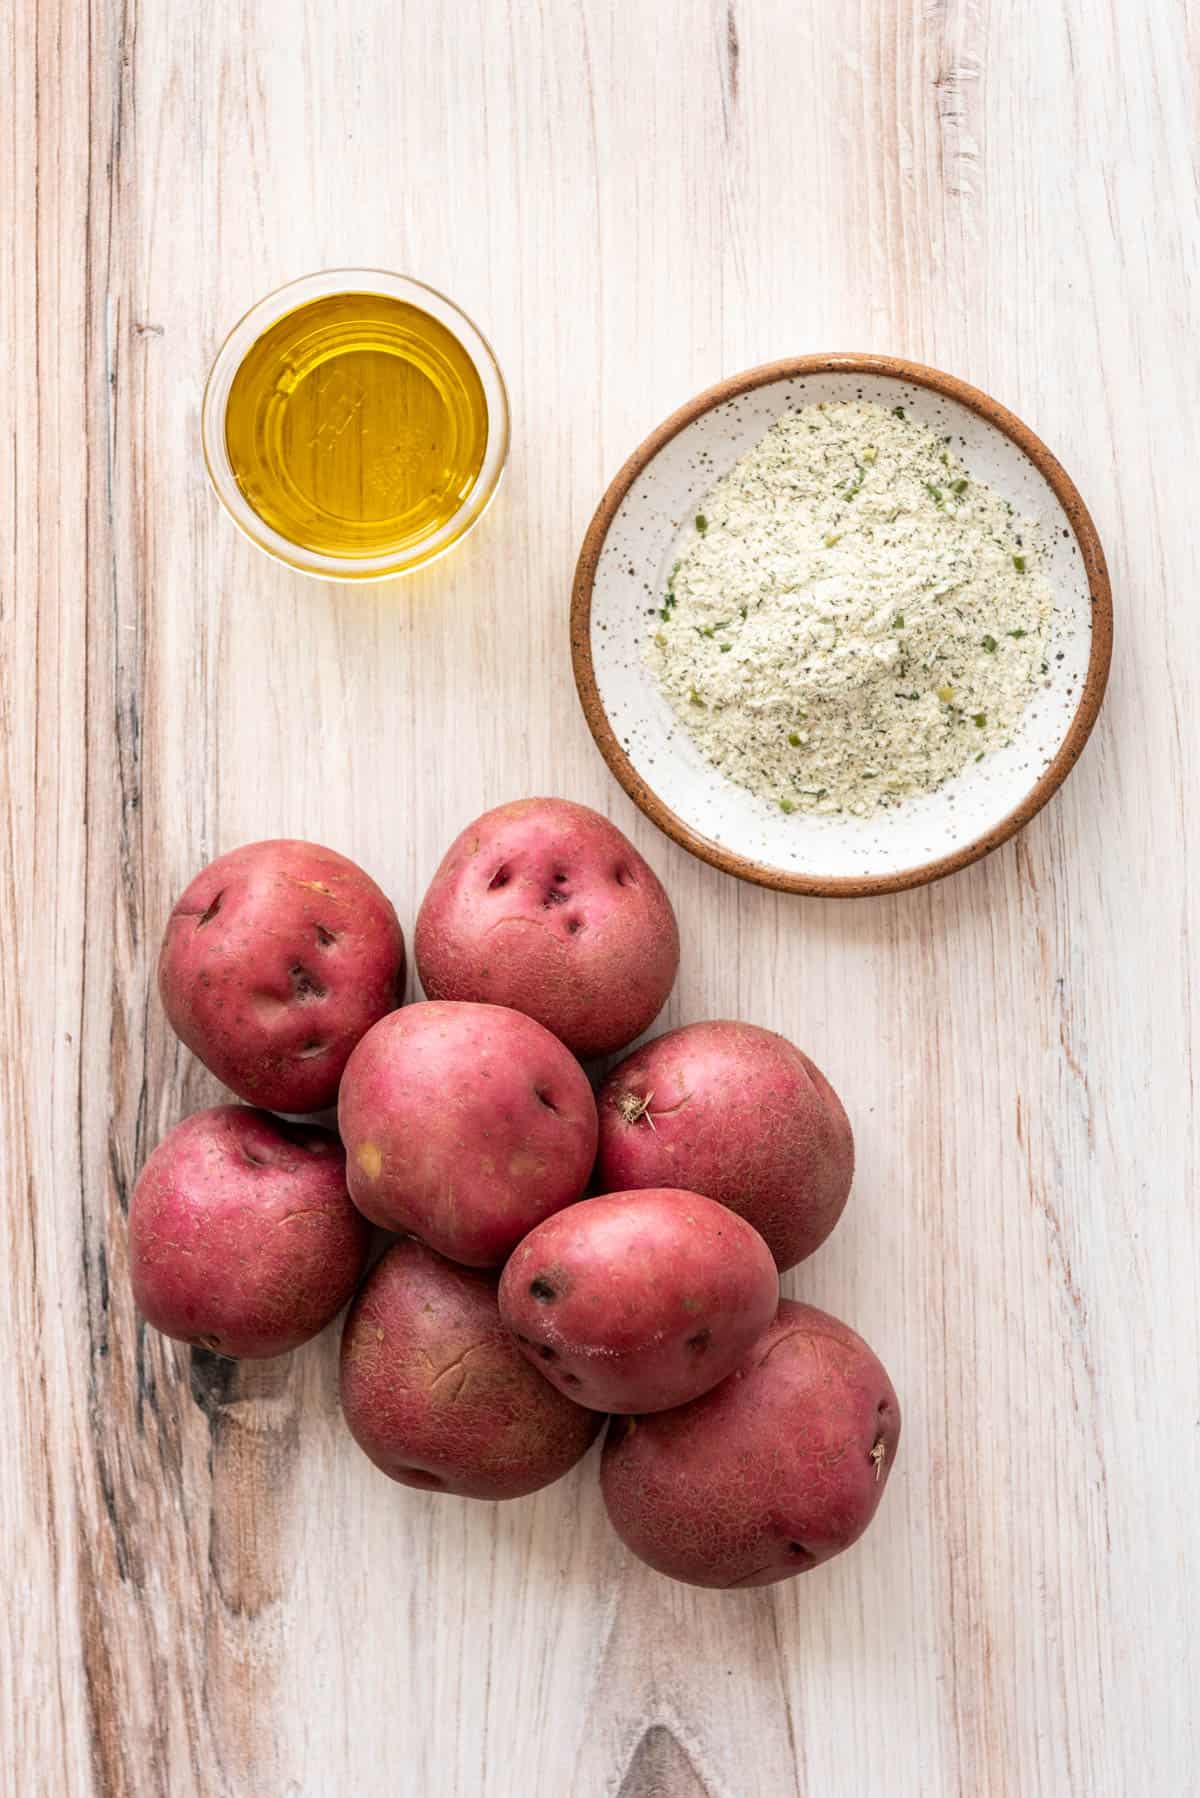 Ingredients for ranch potatoes.